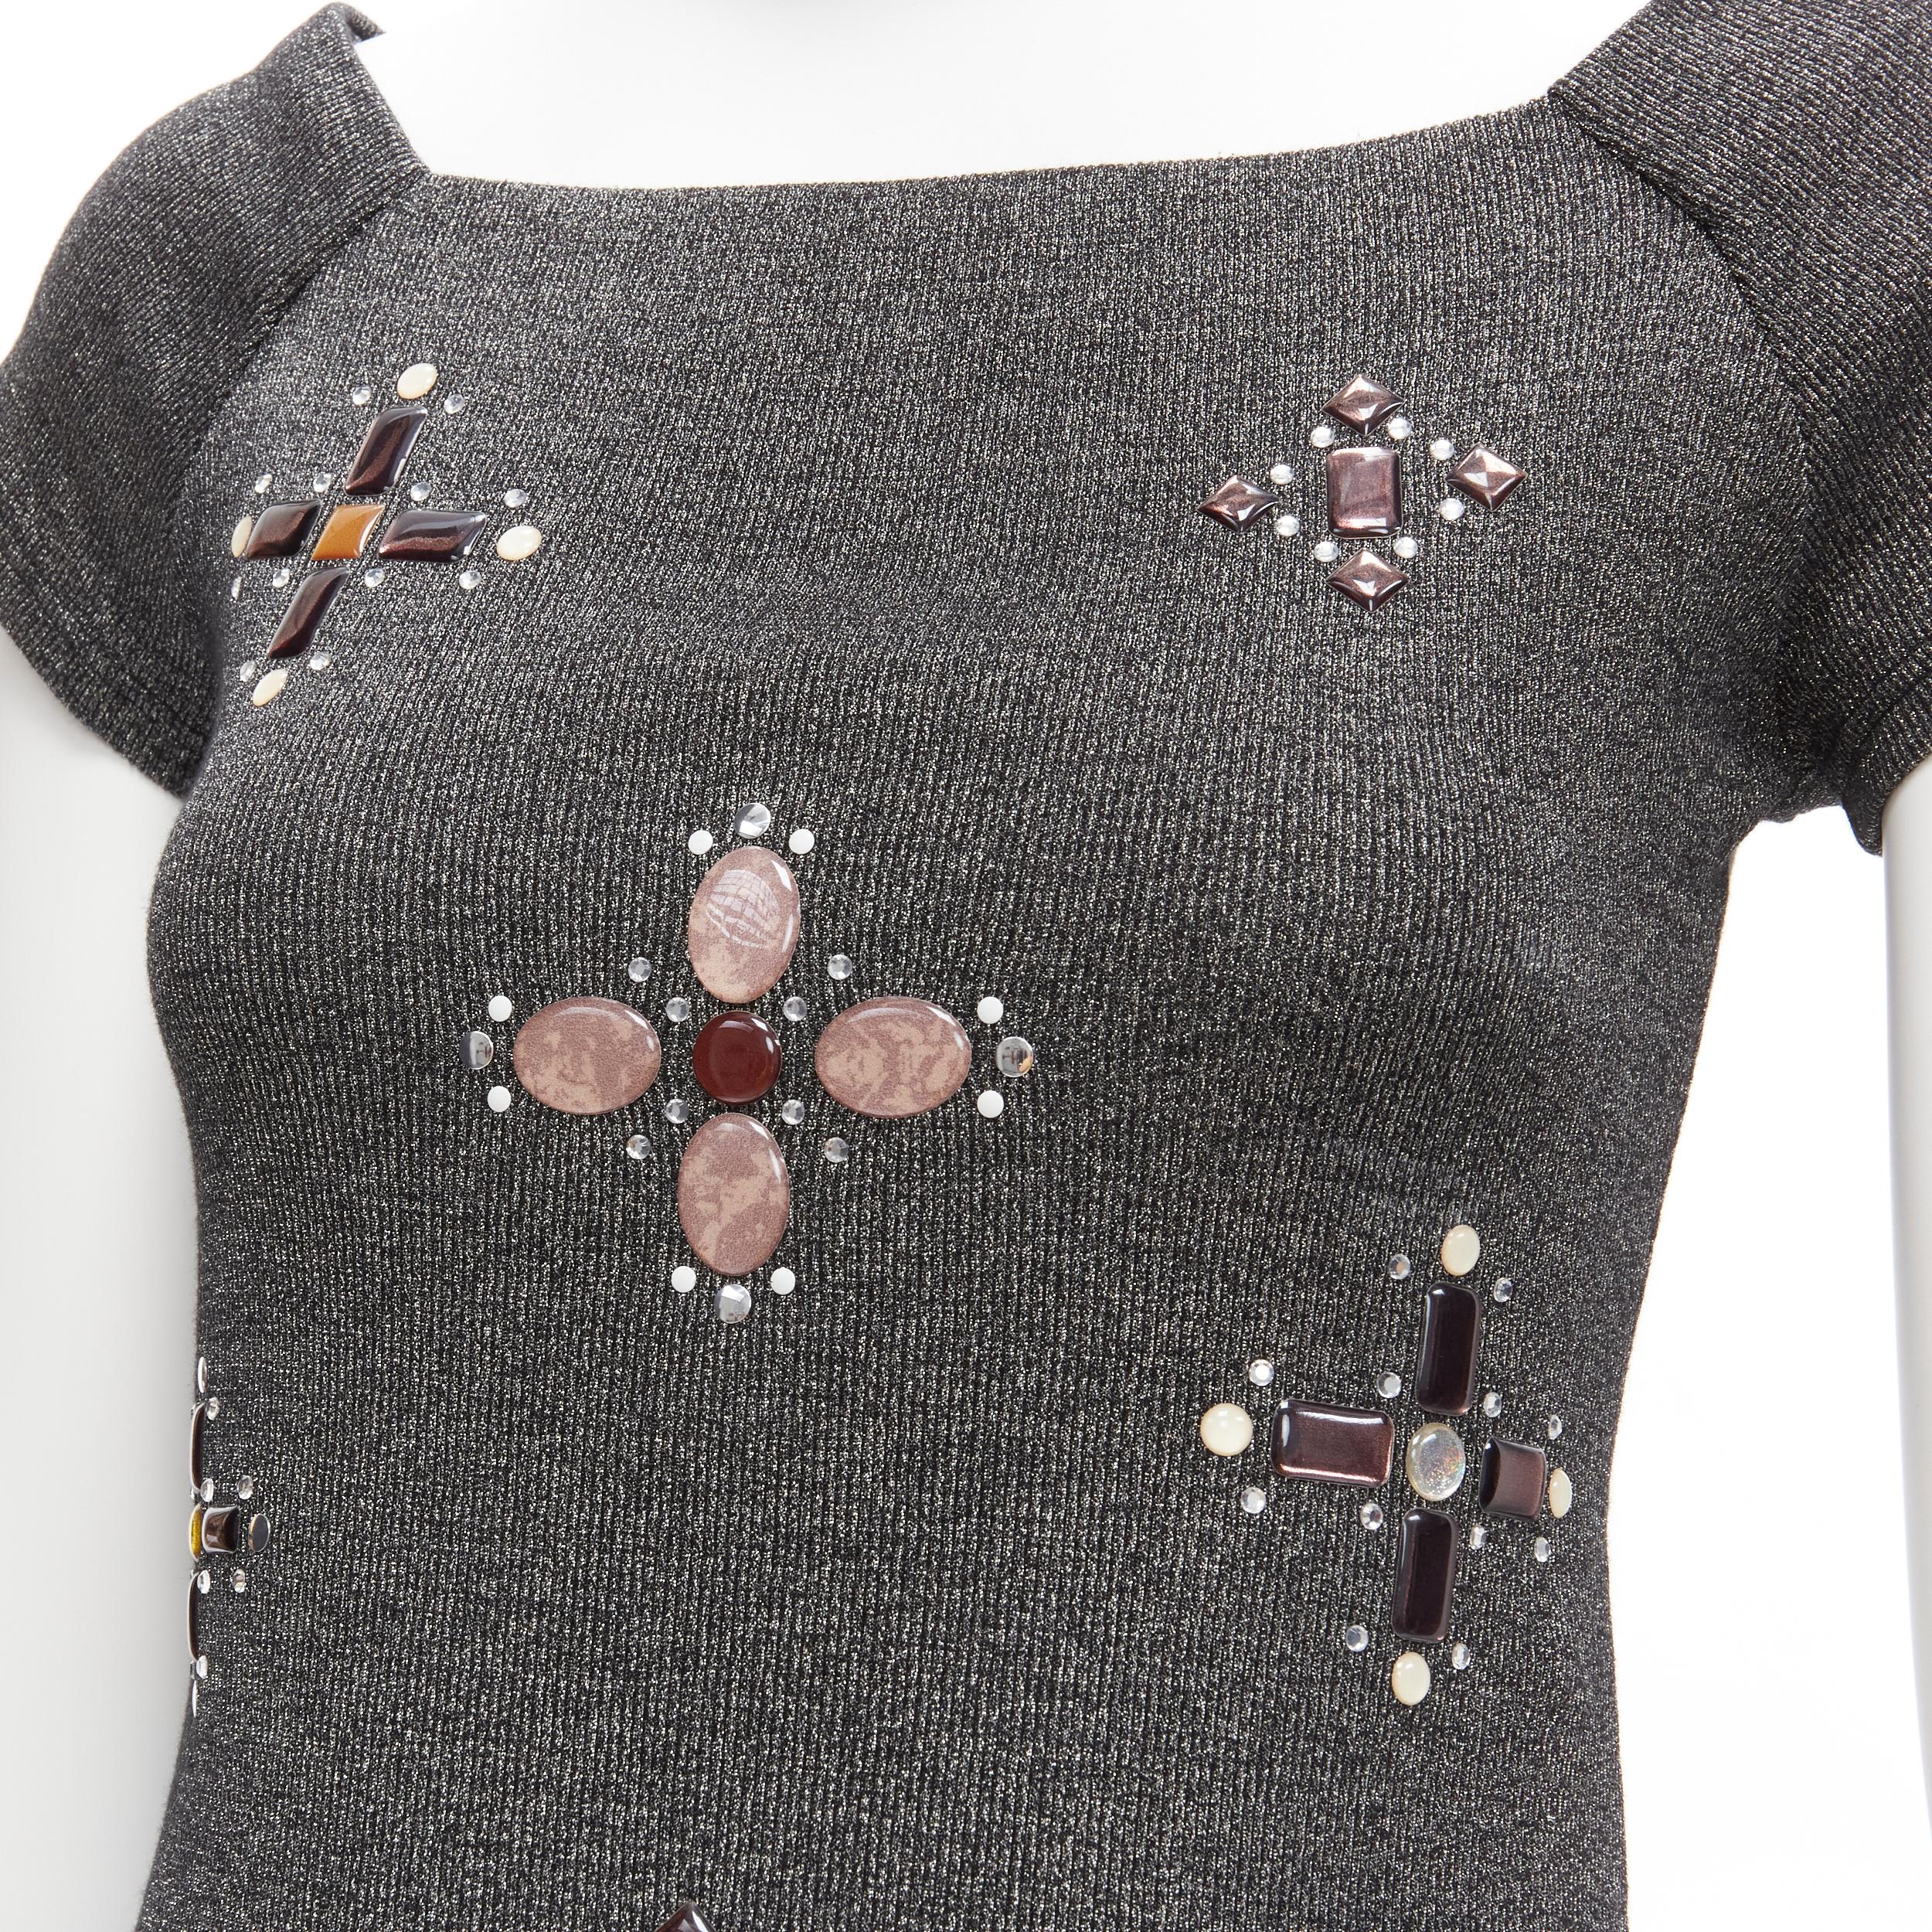 CHANEL silver tone CC logo colorful gems Byzantine Cross embellished fitted top FR36 S
Reference: TGAS/D00297
Brand: Chanel
Designer: Karl Lagerfeld
Material: Cotton, Polyamide, Elastane
Color: Silver, Multicolour
Pattern: Solid
Closure: